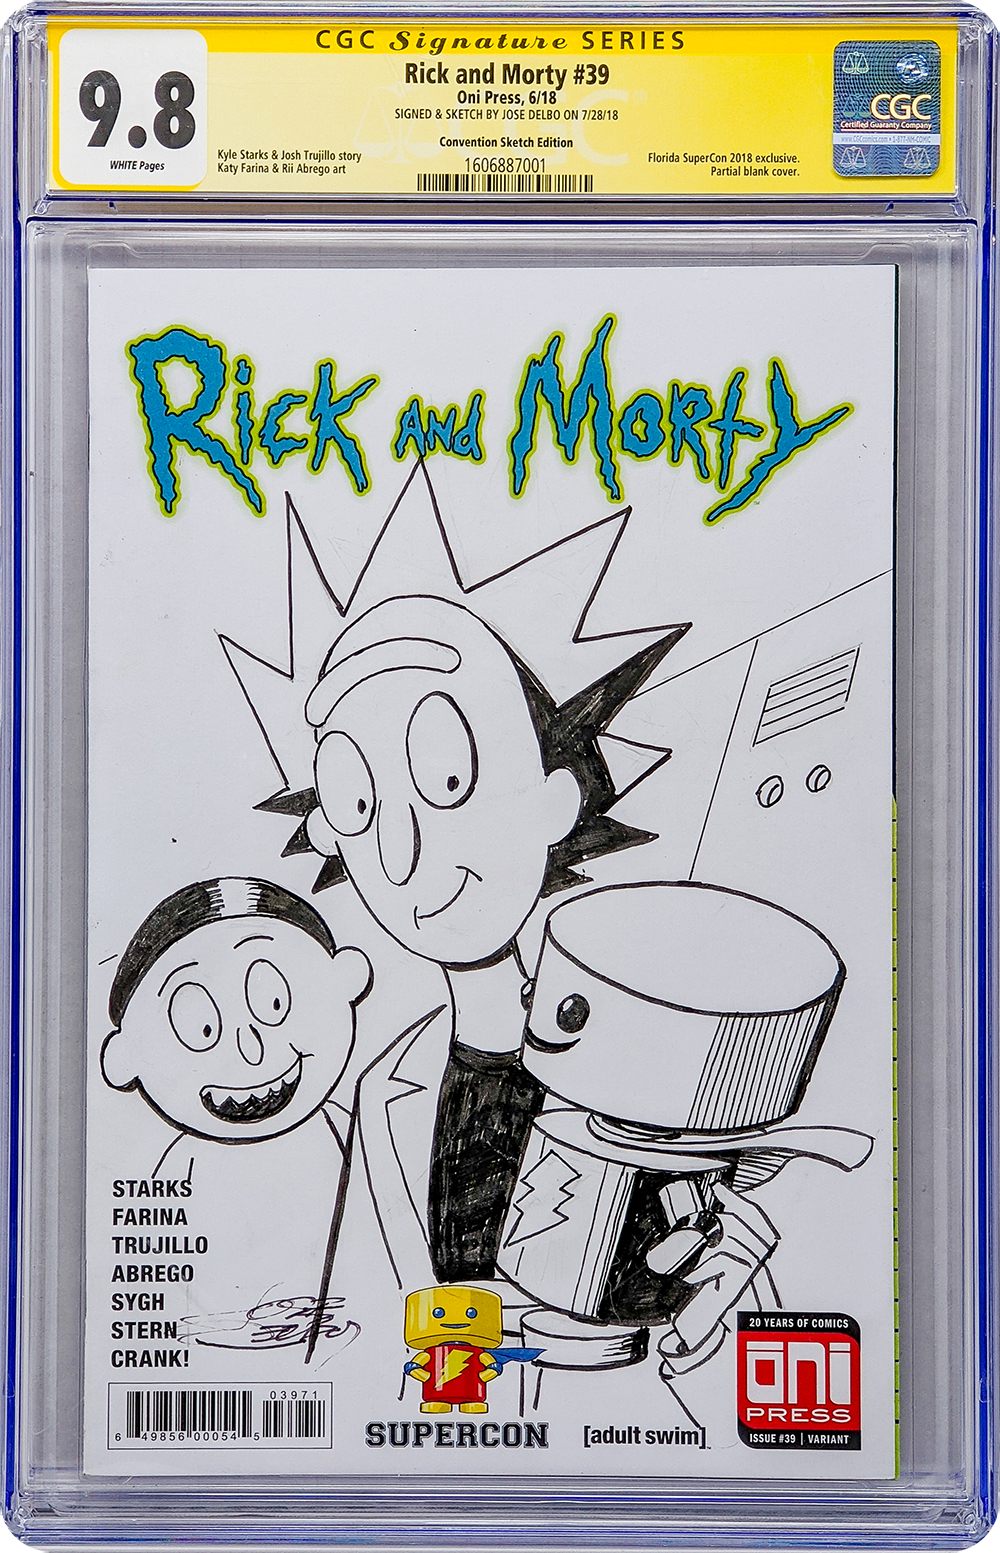 Rick and Morty #39 Oni Press CGC Signature Series 9.8 Signed & Sketched by Jose Delbo GalaxyCon